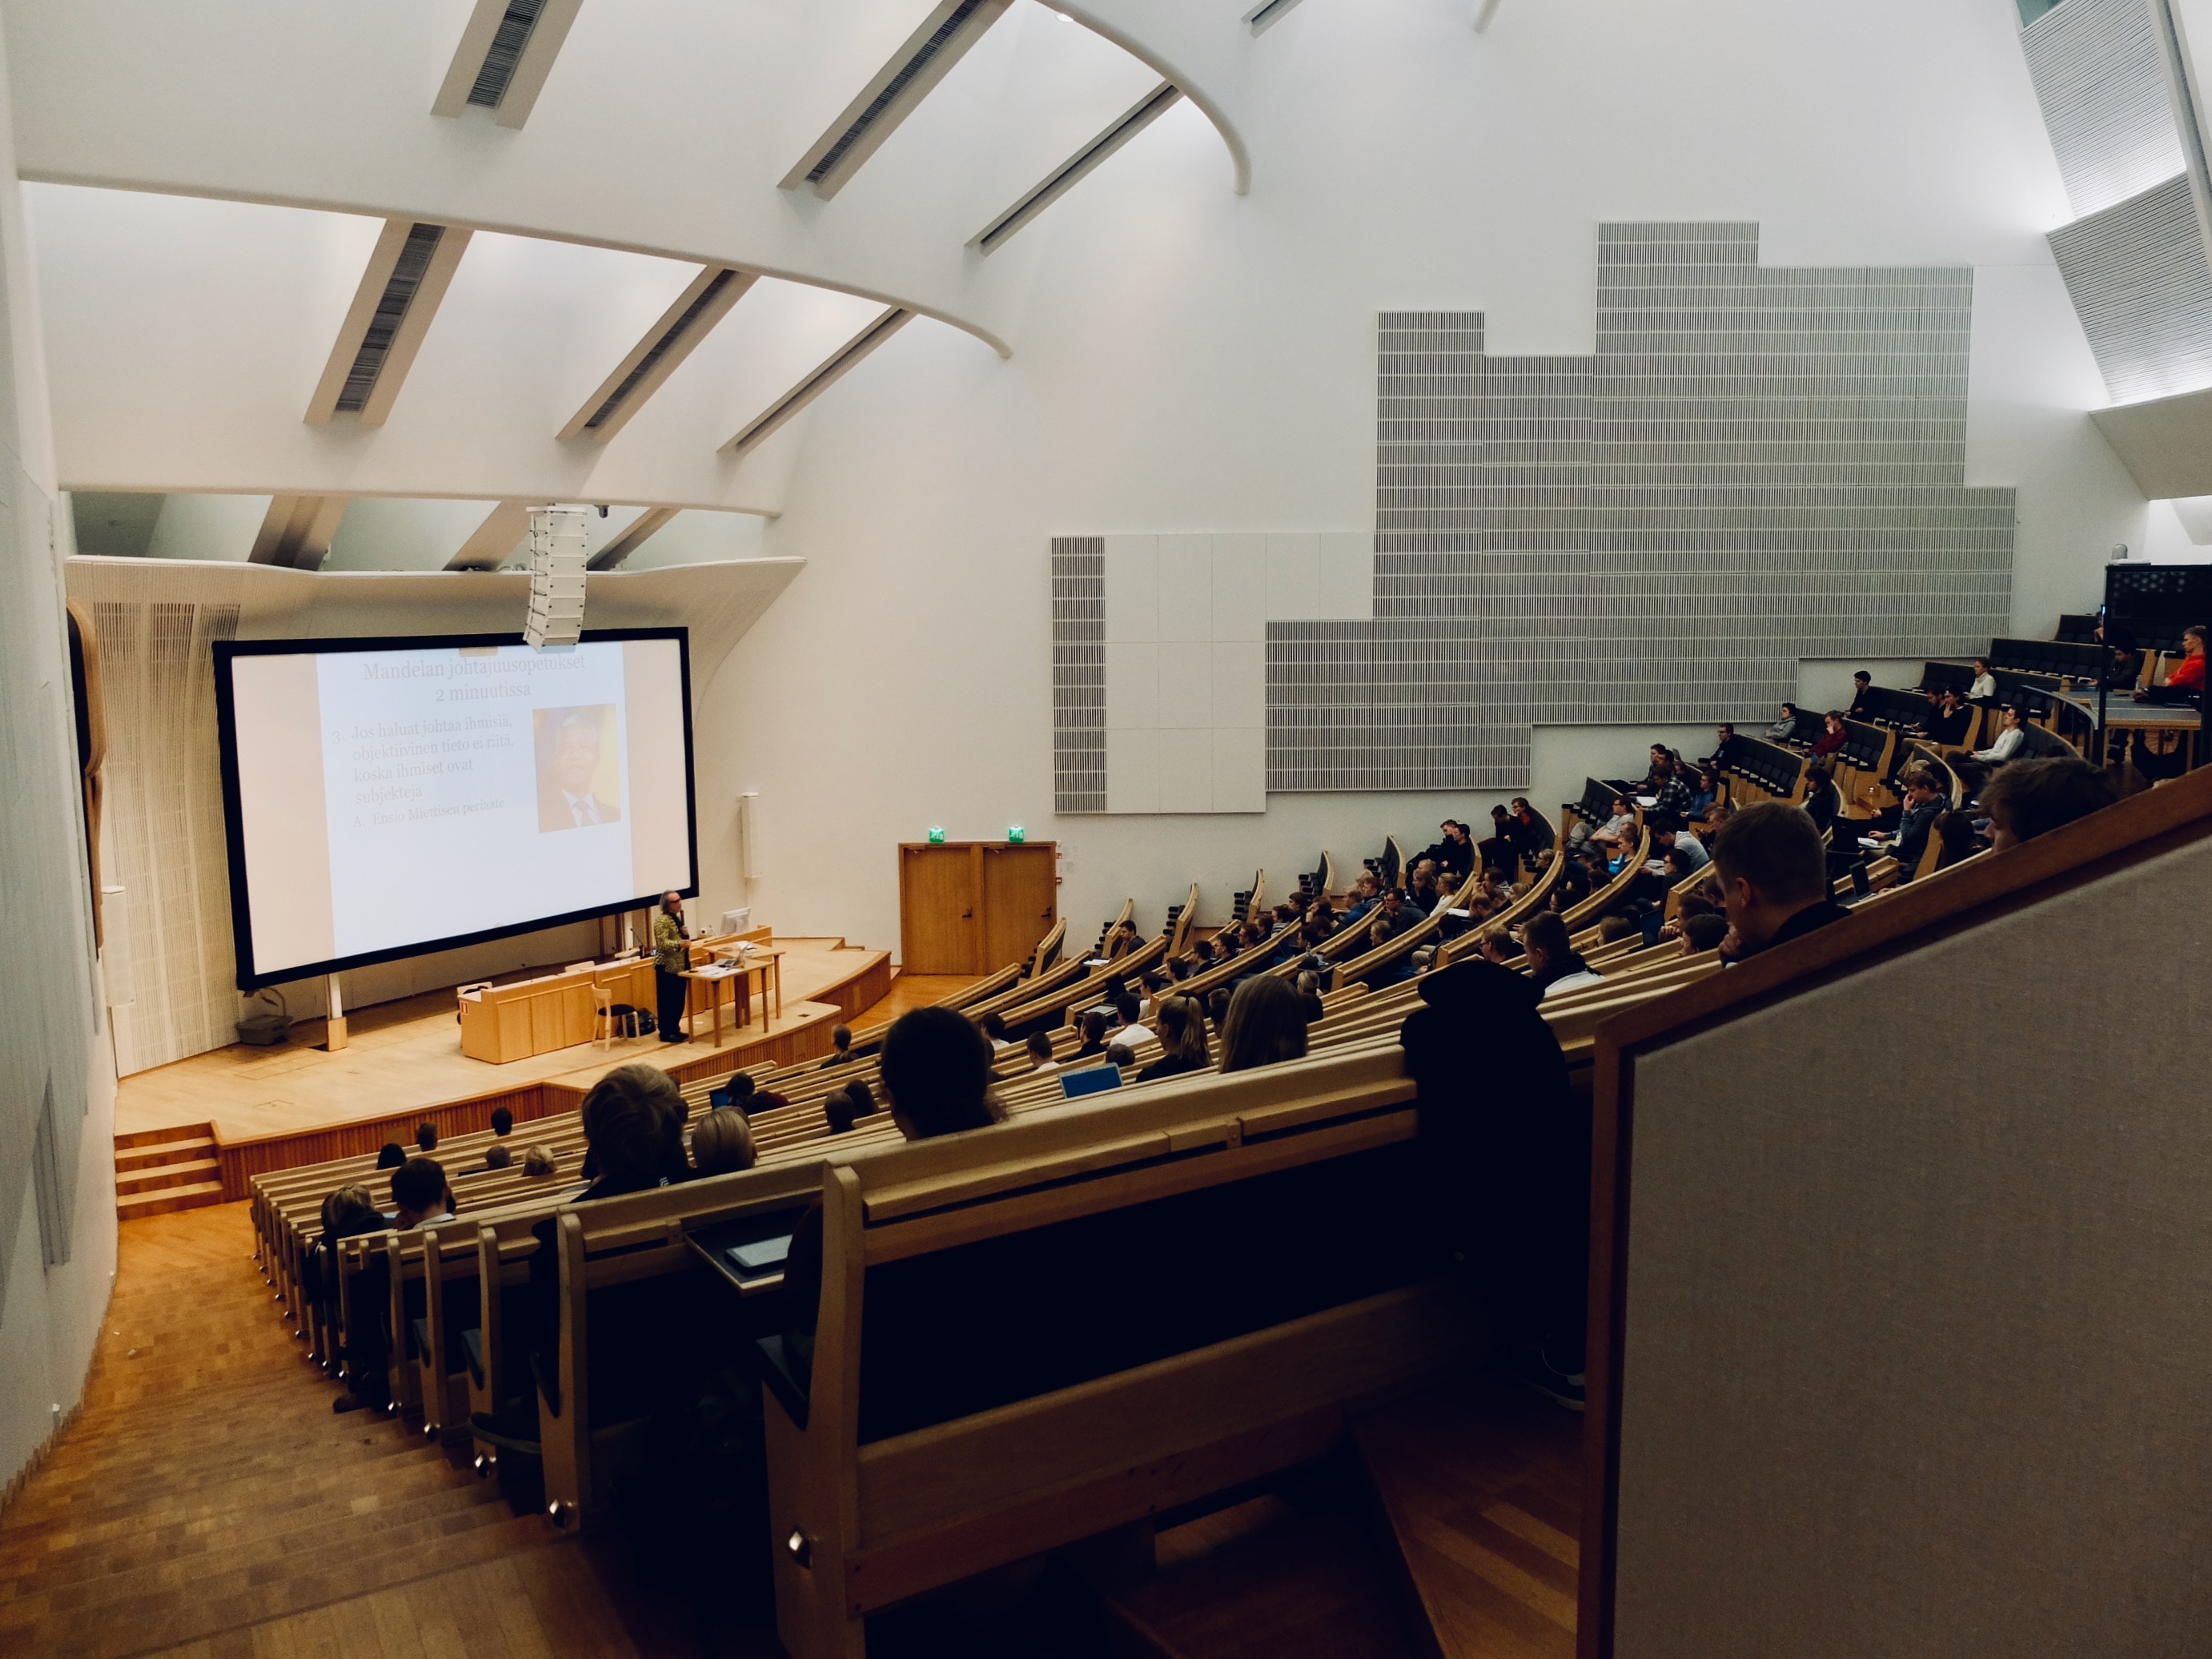 An image of a lecture hall.